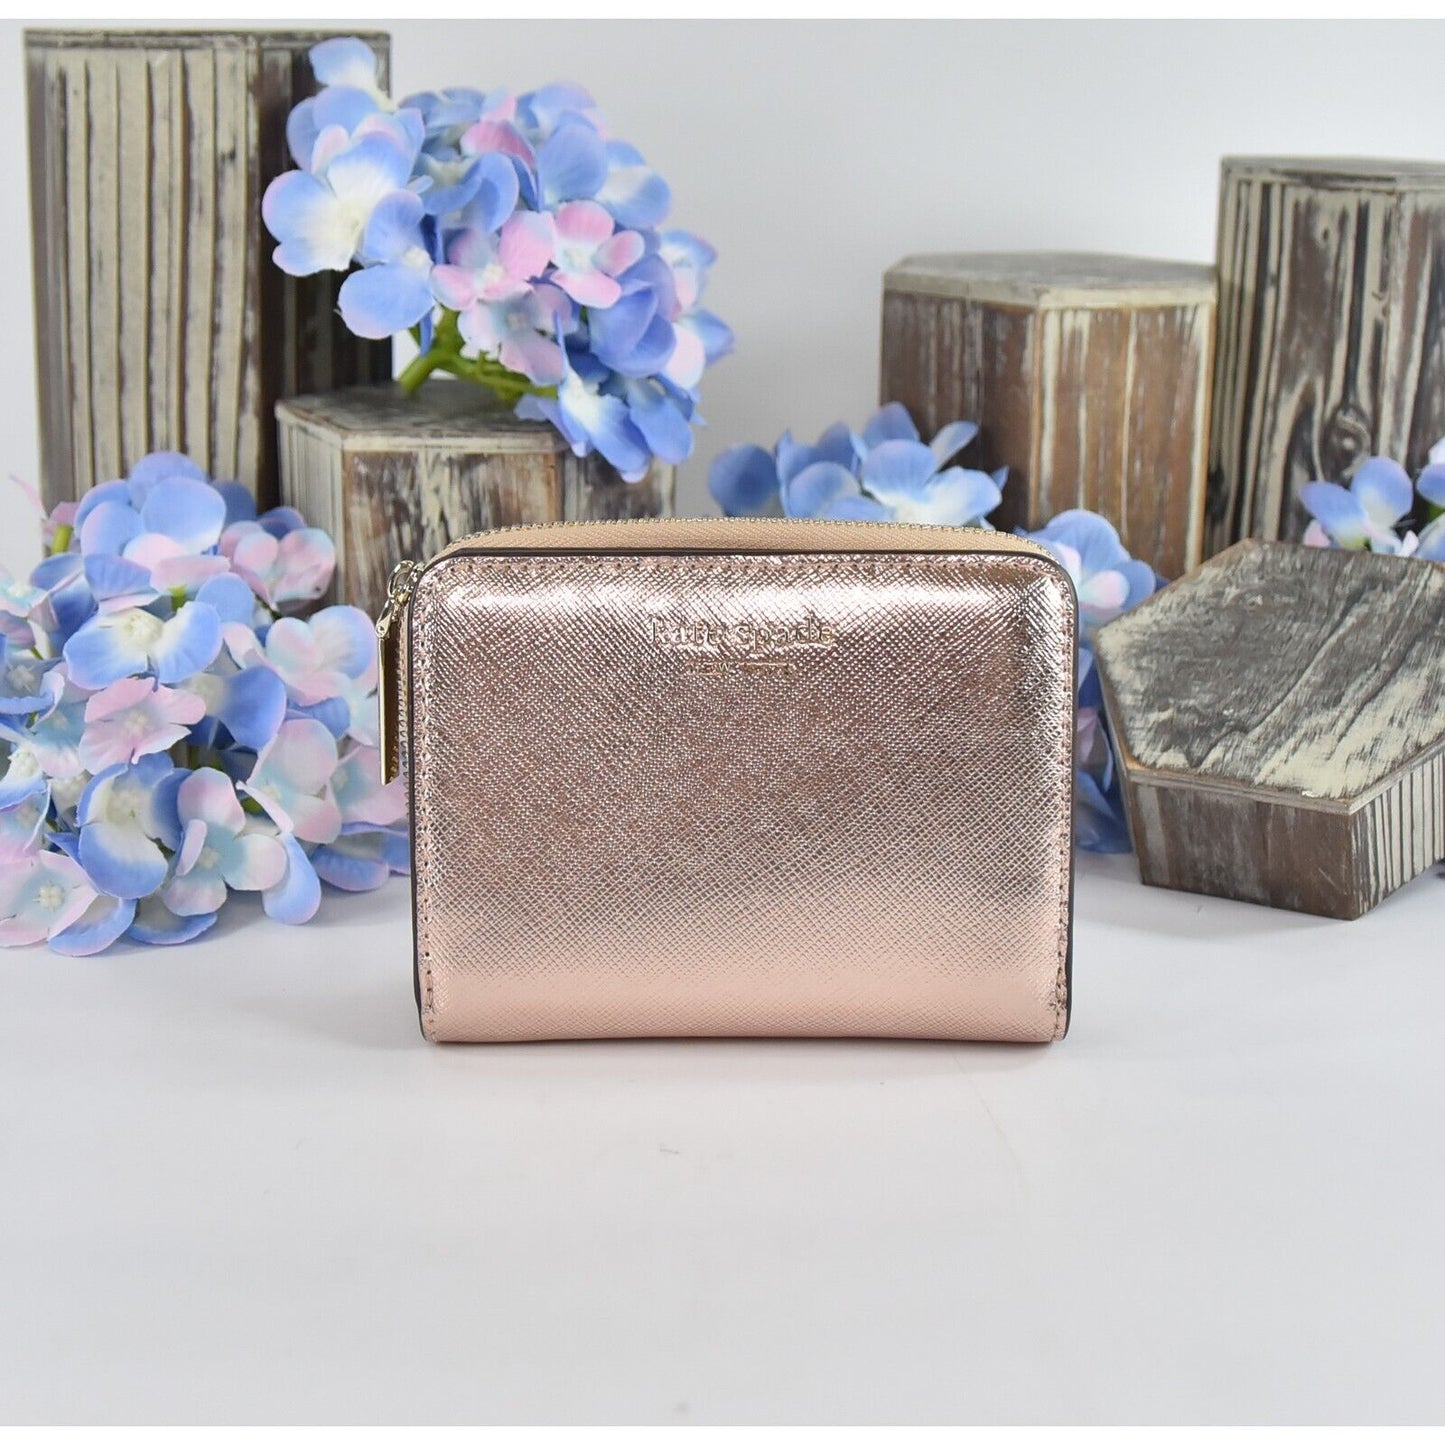 Kate Spade Rose Gold Leather Spencer Compact Wallet NWT